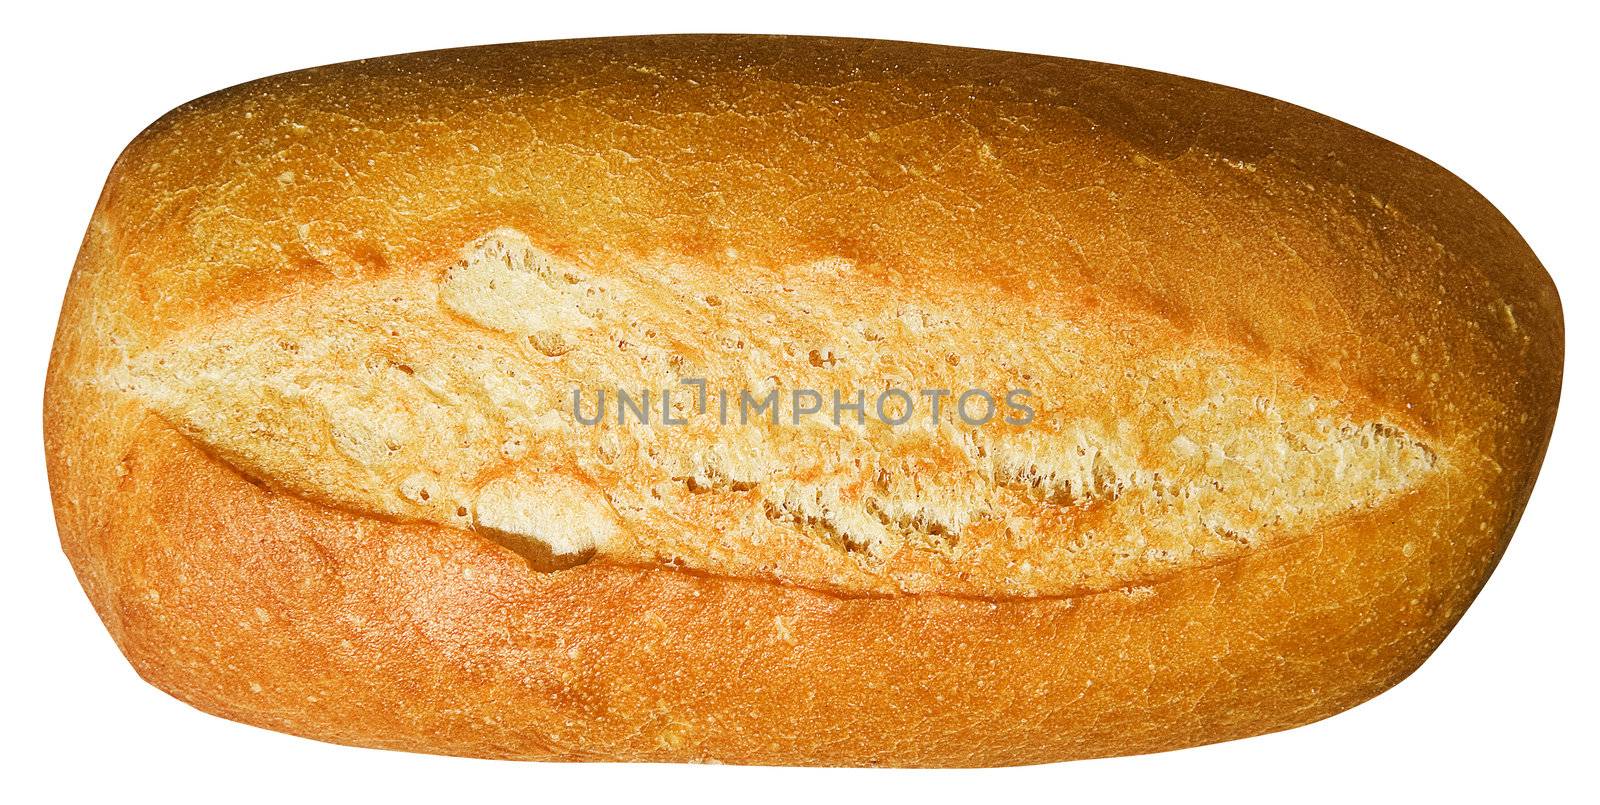 One warm freshly baked baguette with a glazed crust